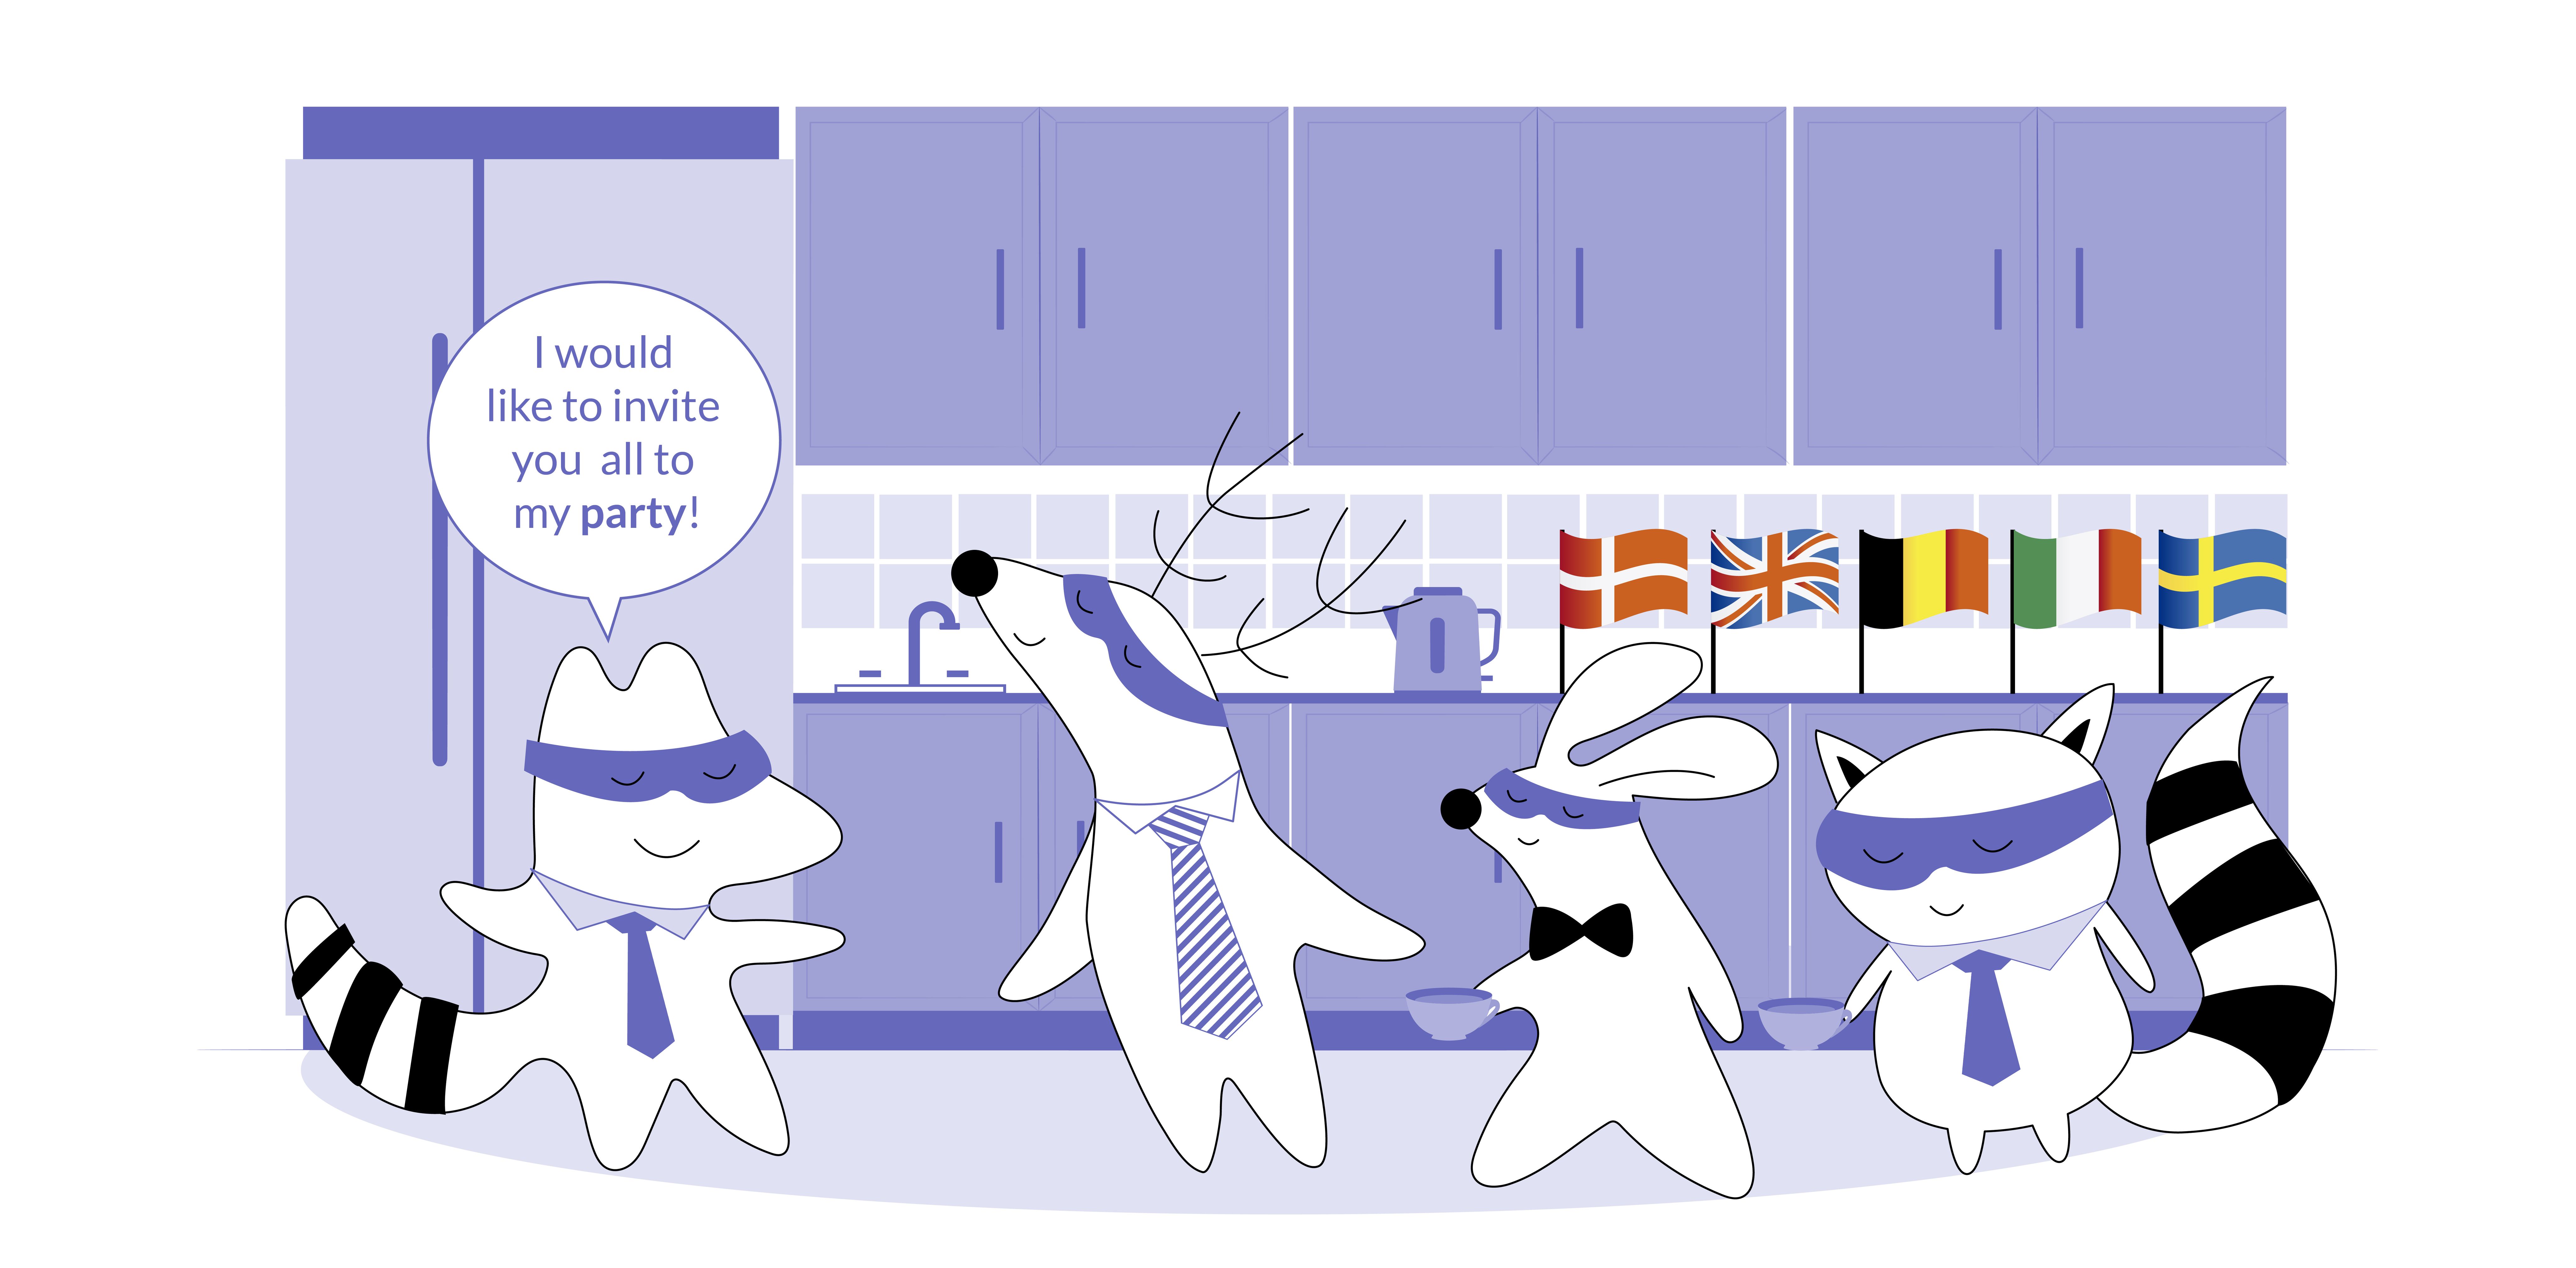  Iggy, Soren, Pocky, and Benji in the office kitchen